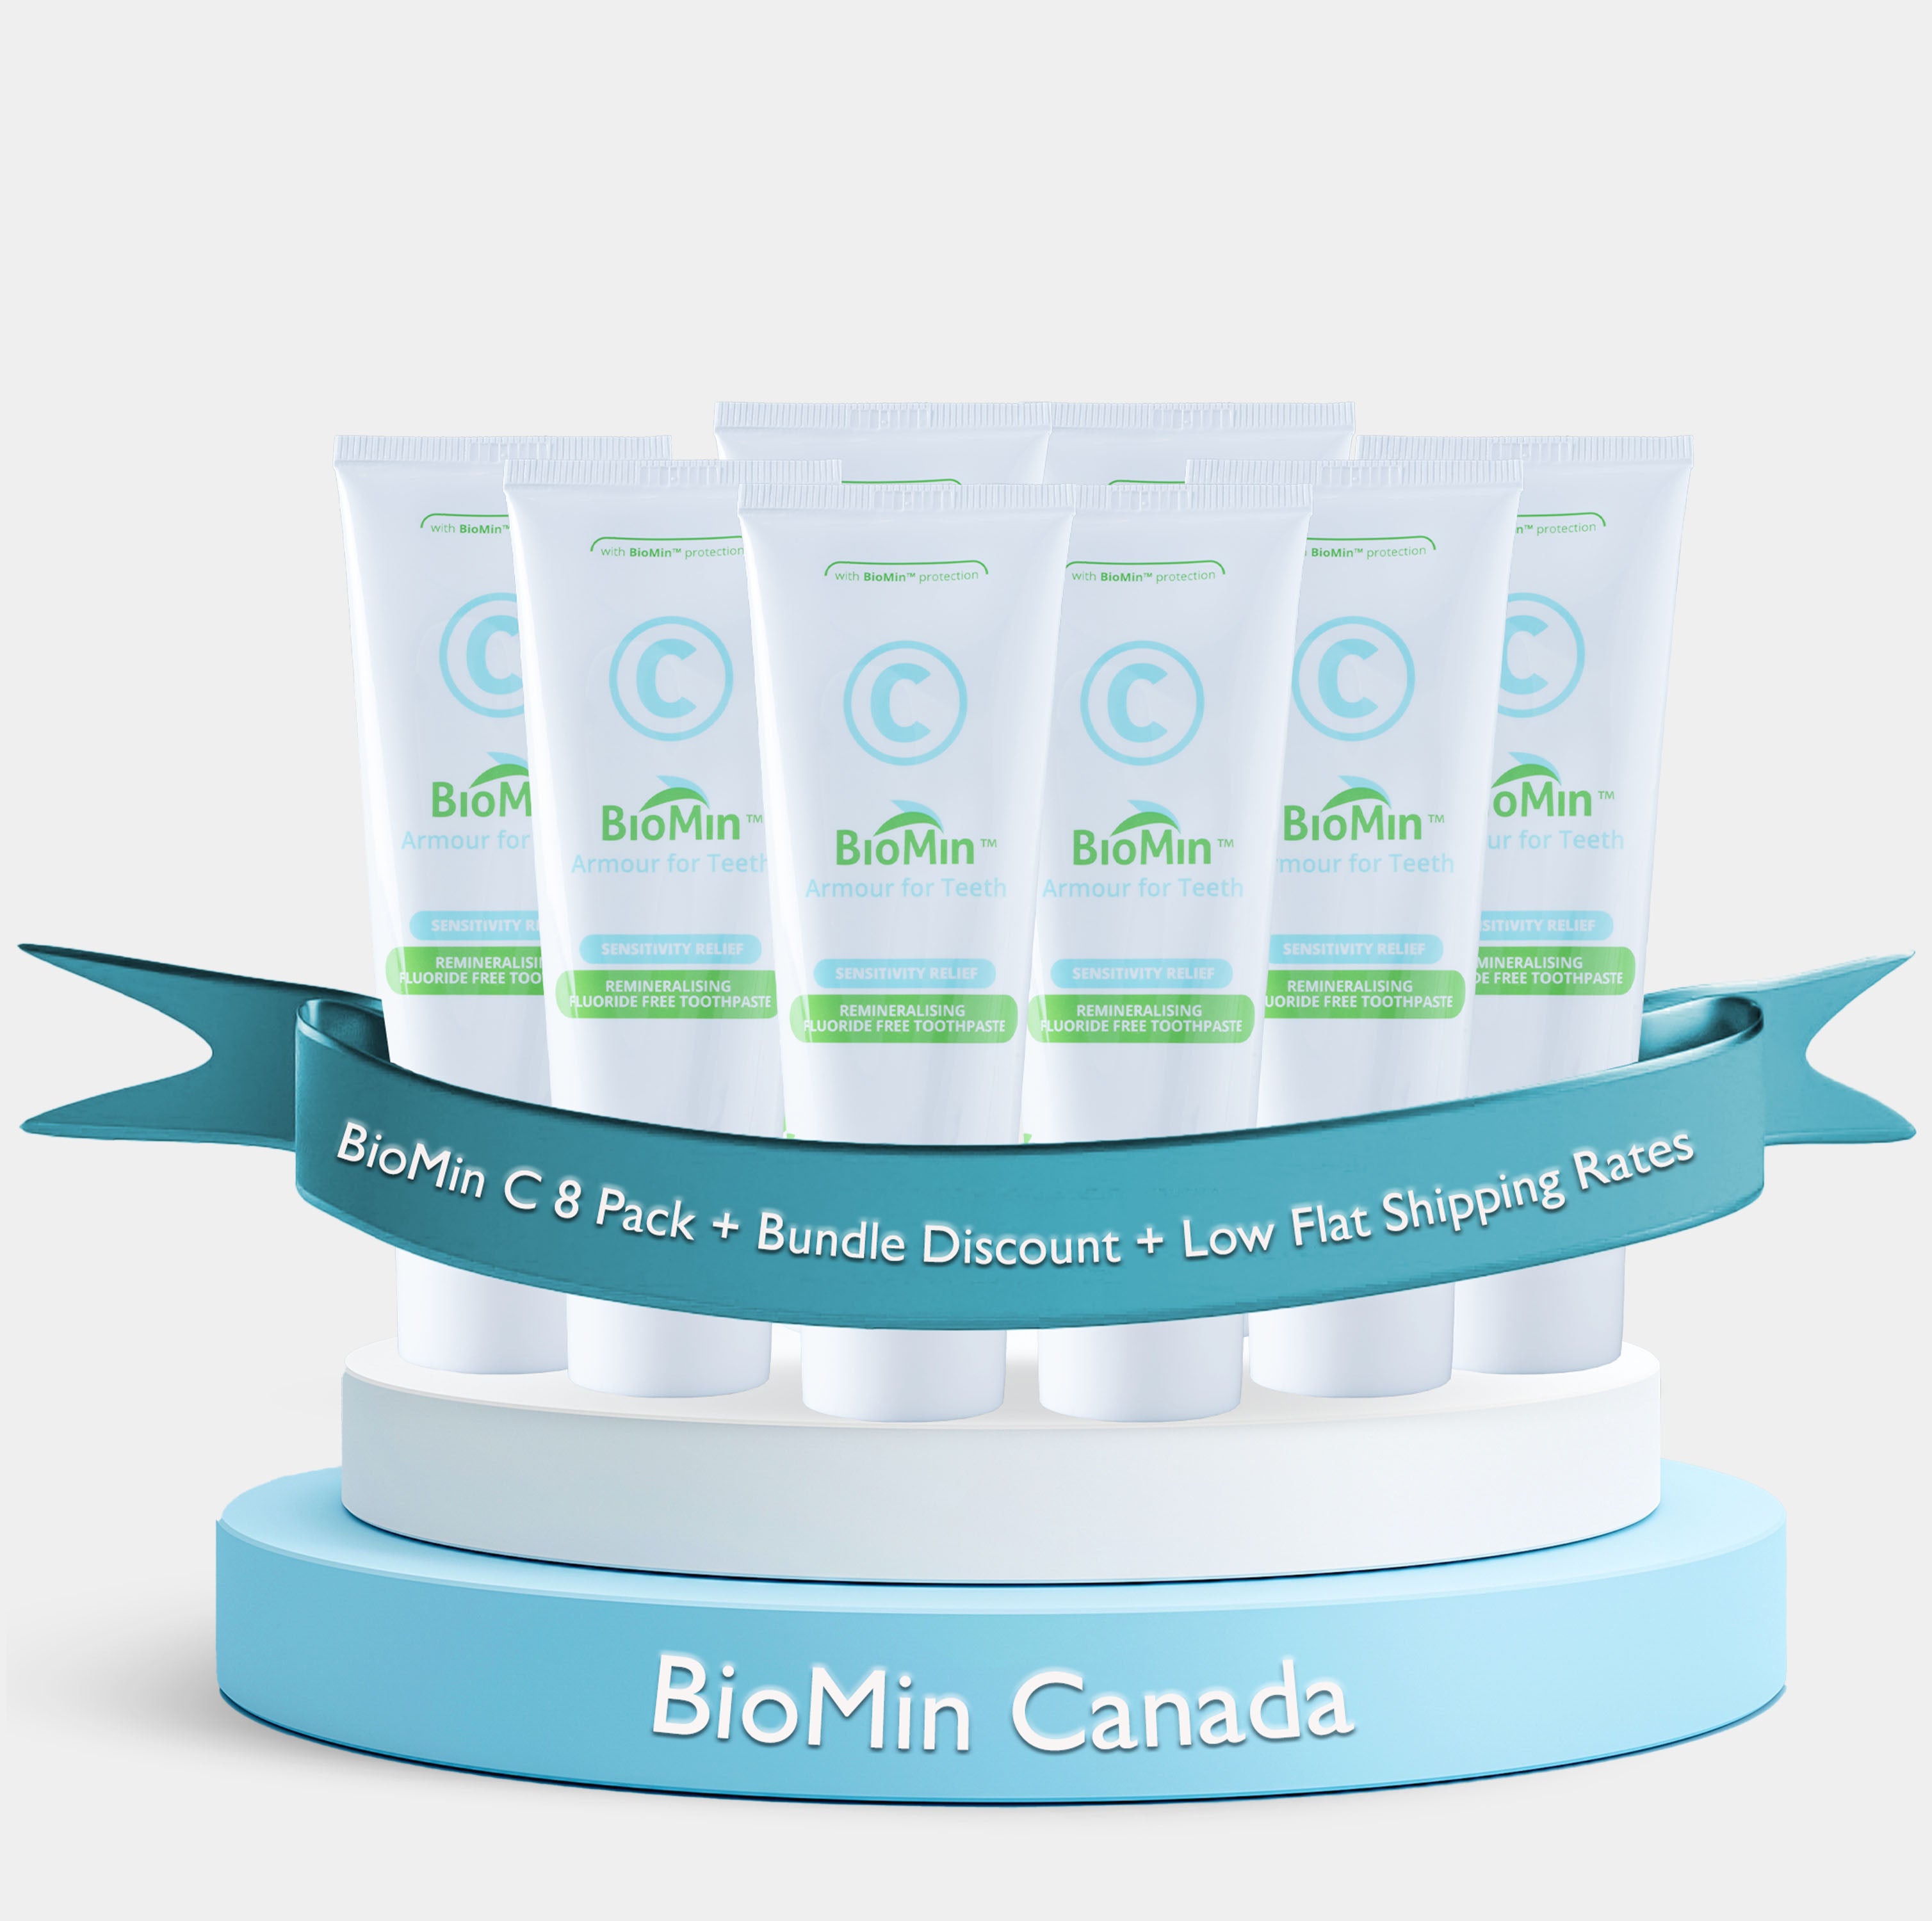 BioMin C 8 Pack + Bundle Discount + Low Flat Shipping Rates